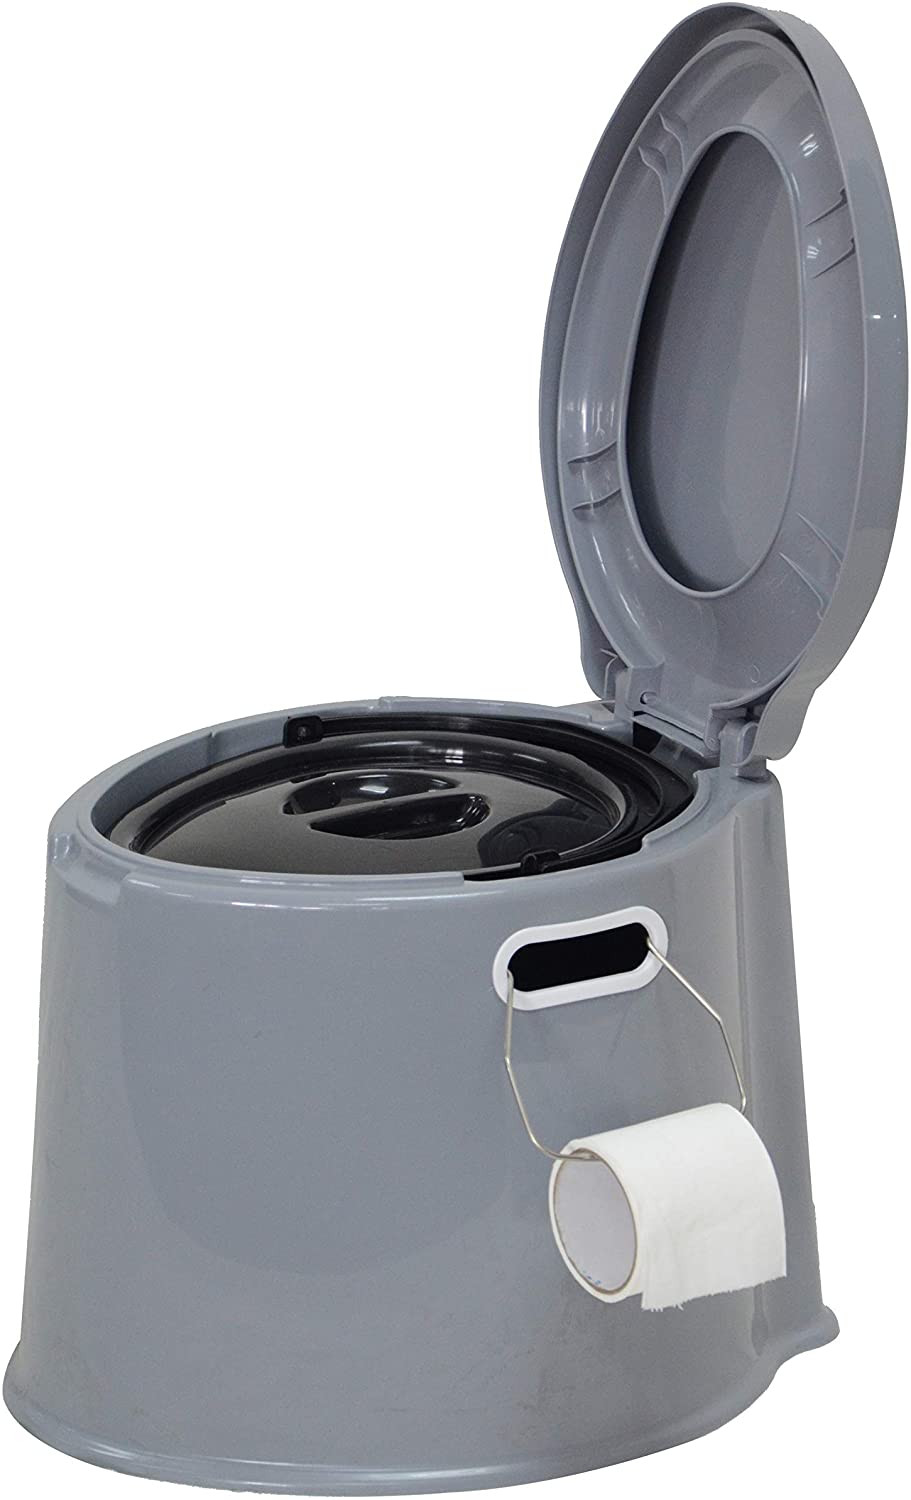 Denny International 【LIGHT WEIGHT】 Large 6L Compact Portable Toilet Potty Loo with Washable Basket and Toilet Roll Holder for Pool Party Camping Caravan Picnic & Festivals